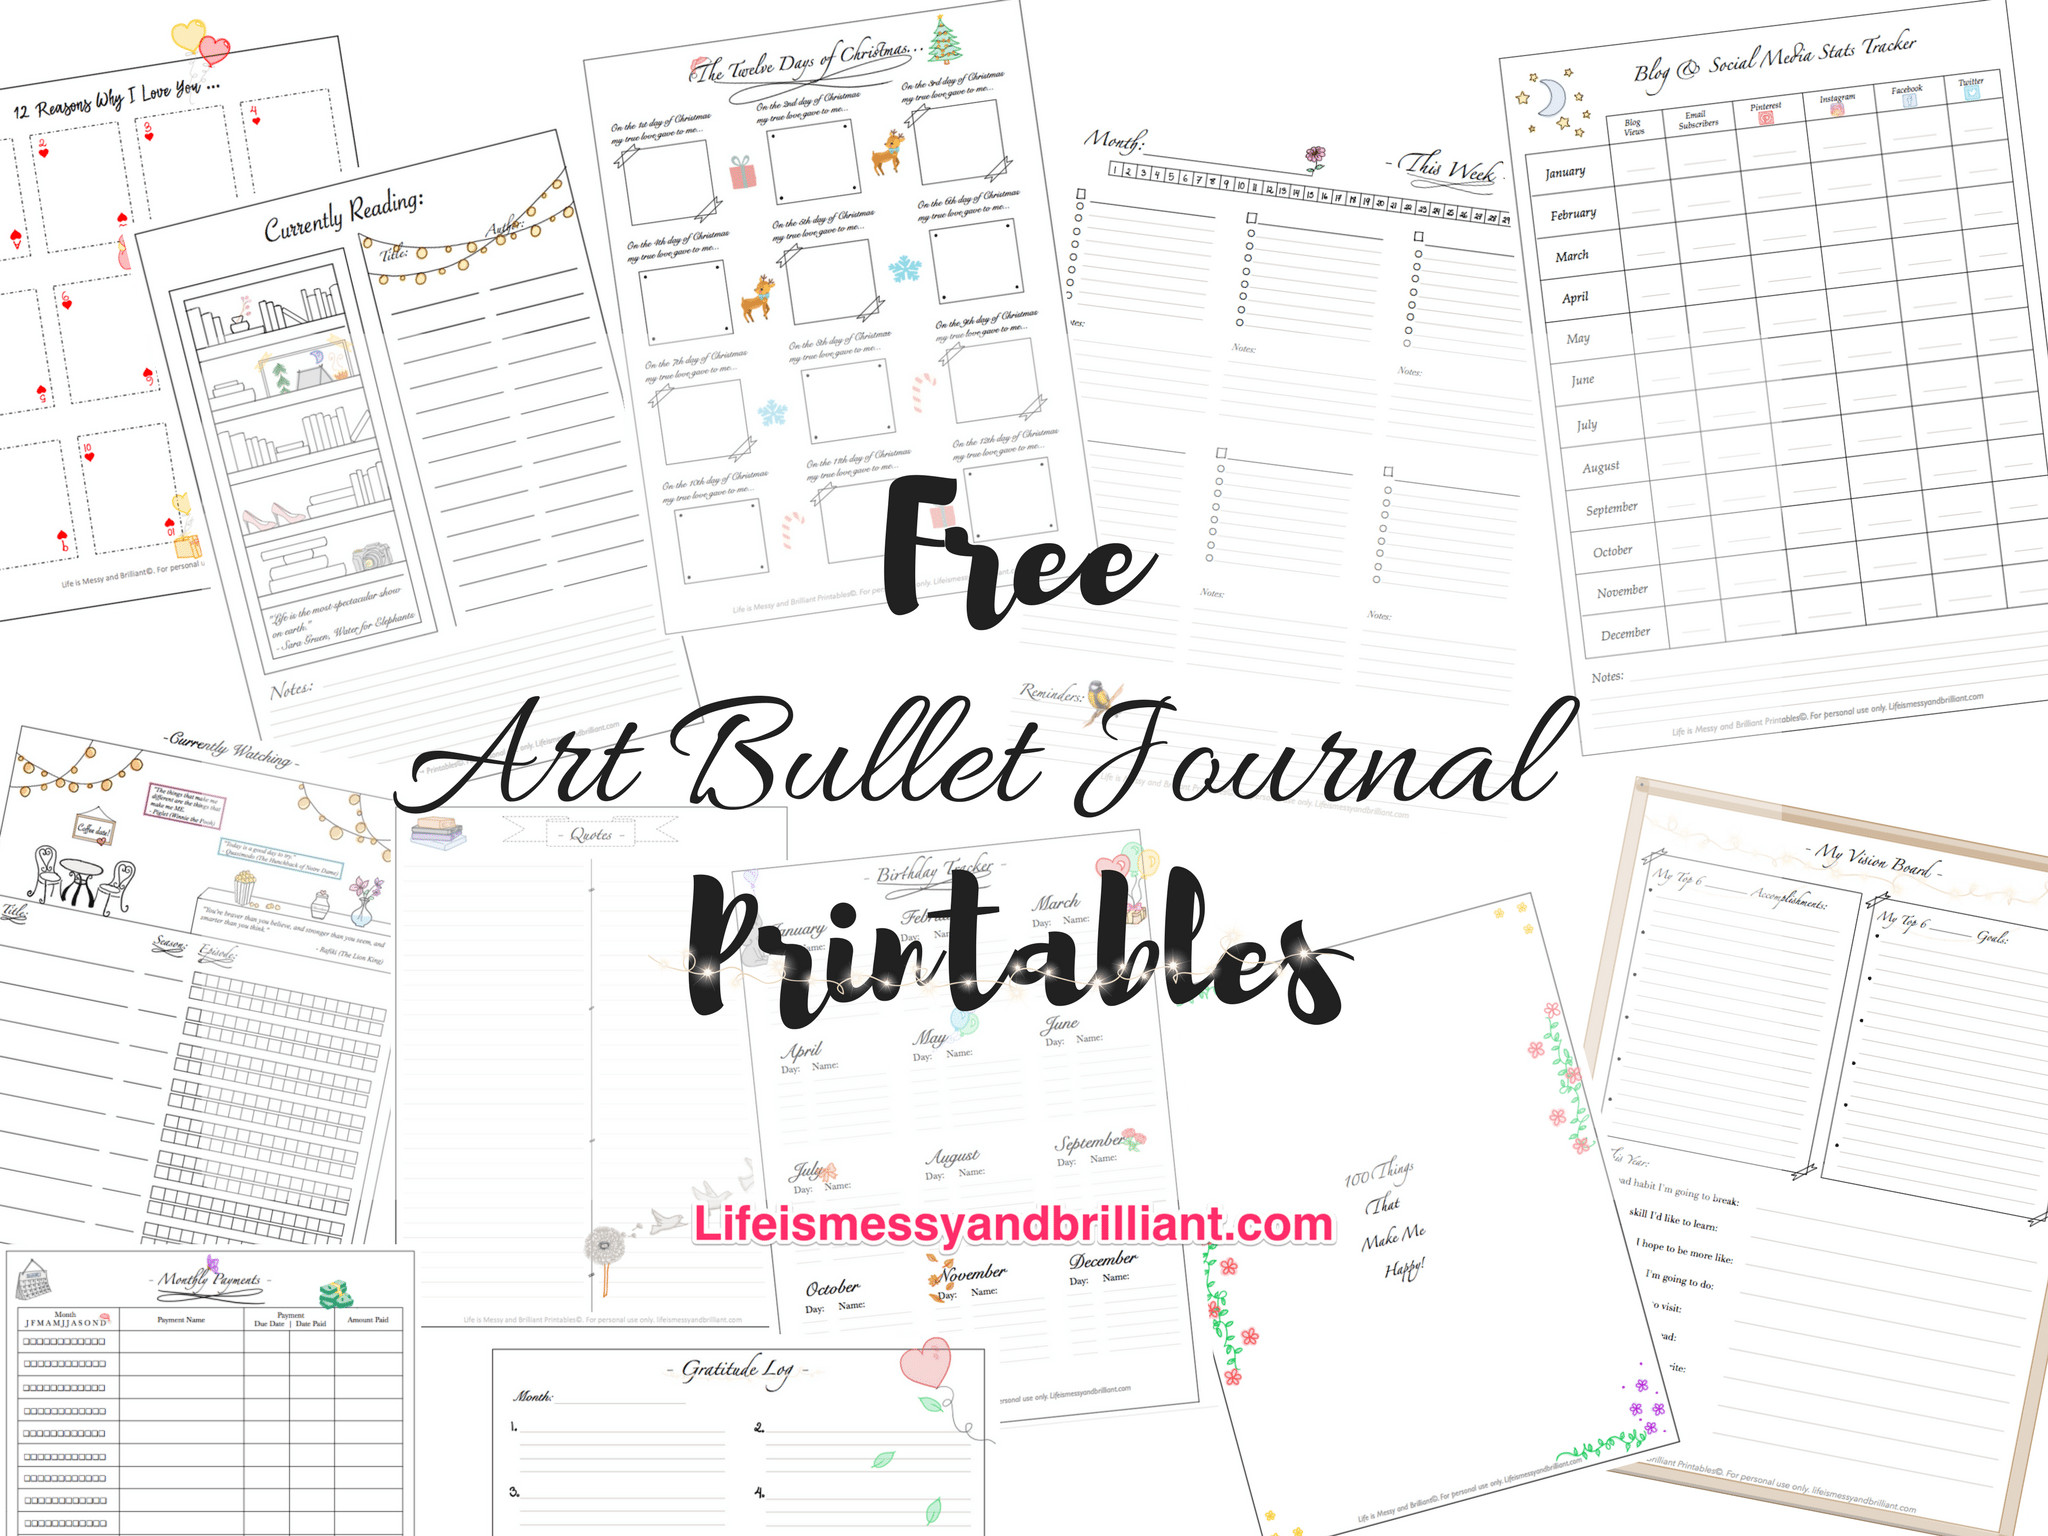 FREE Art Lettering and School Printables